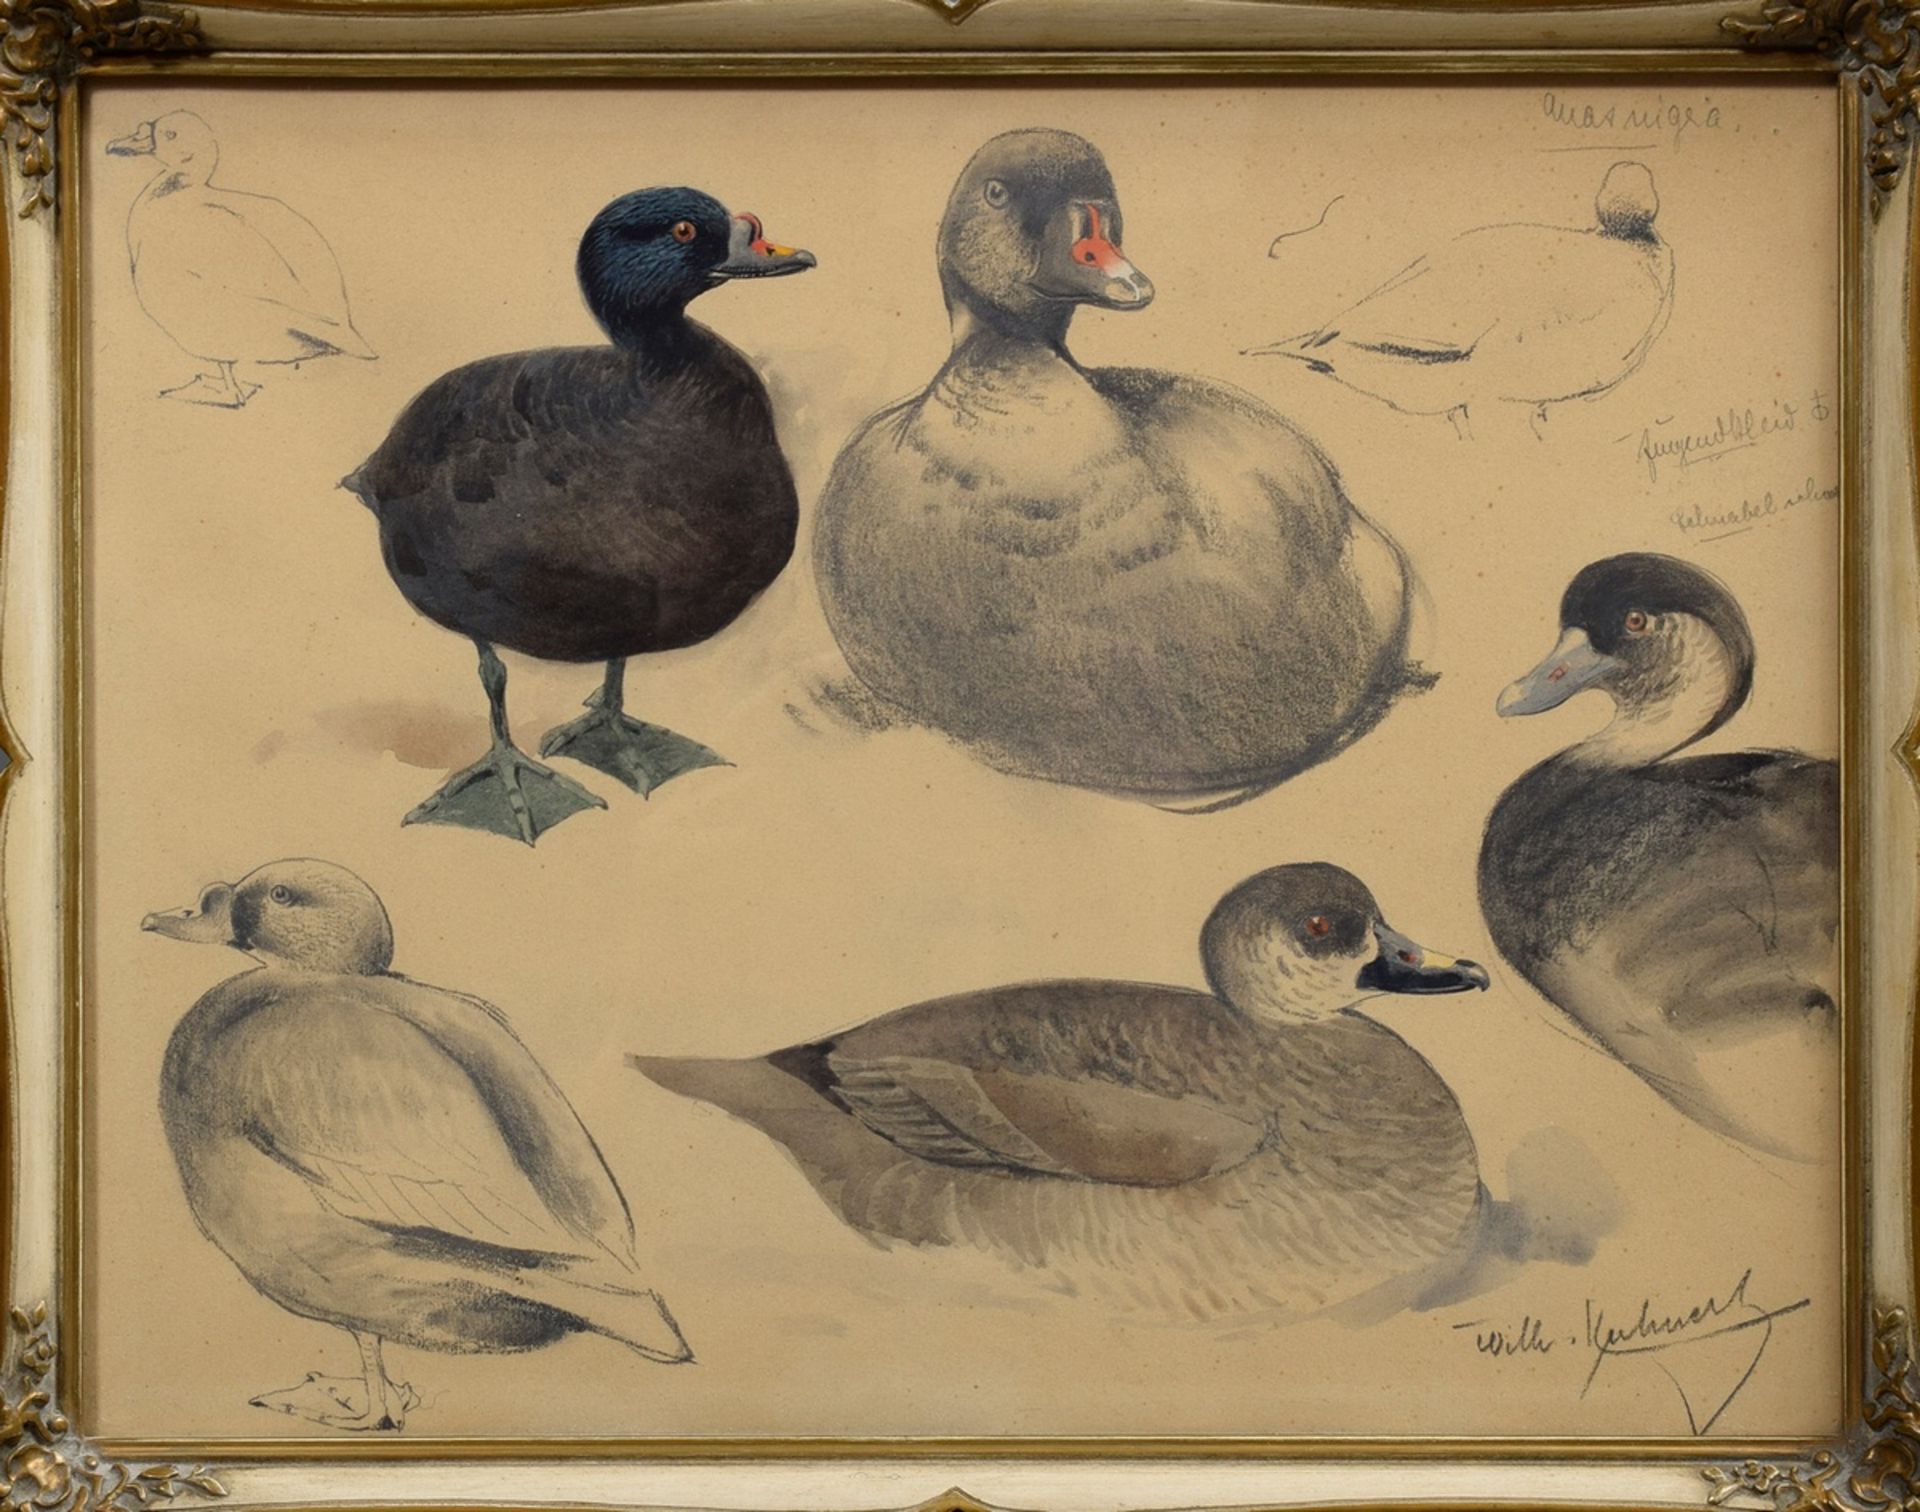 Kuhnert, Wilhelm (1865-1926) "Study sheet ducks", pencil/paper partly watercolored and inscr., b.r. - Image 2 of 4